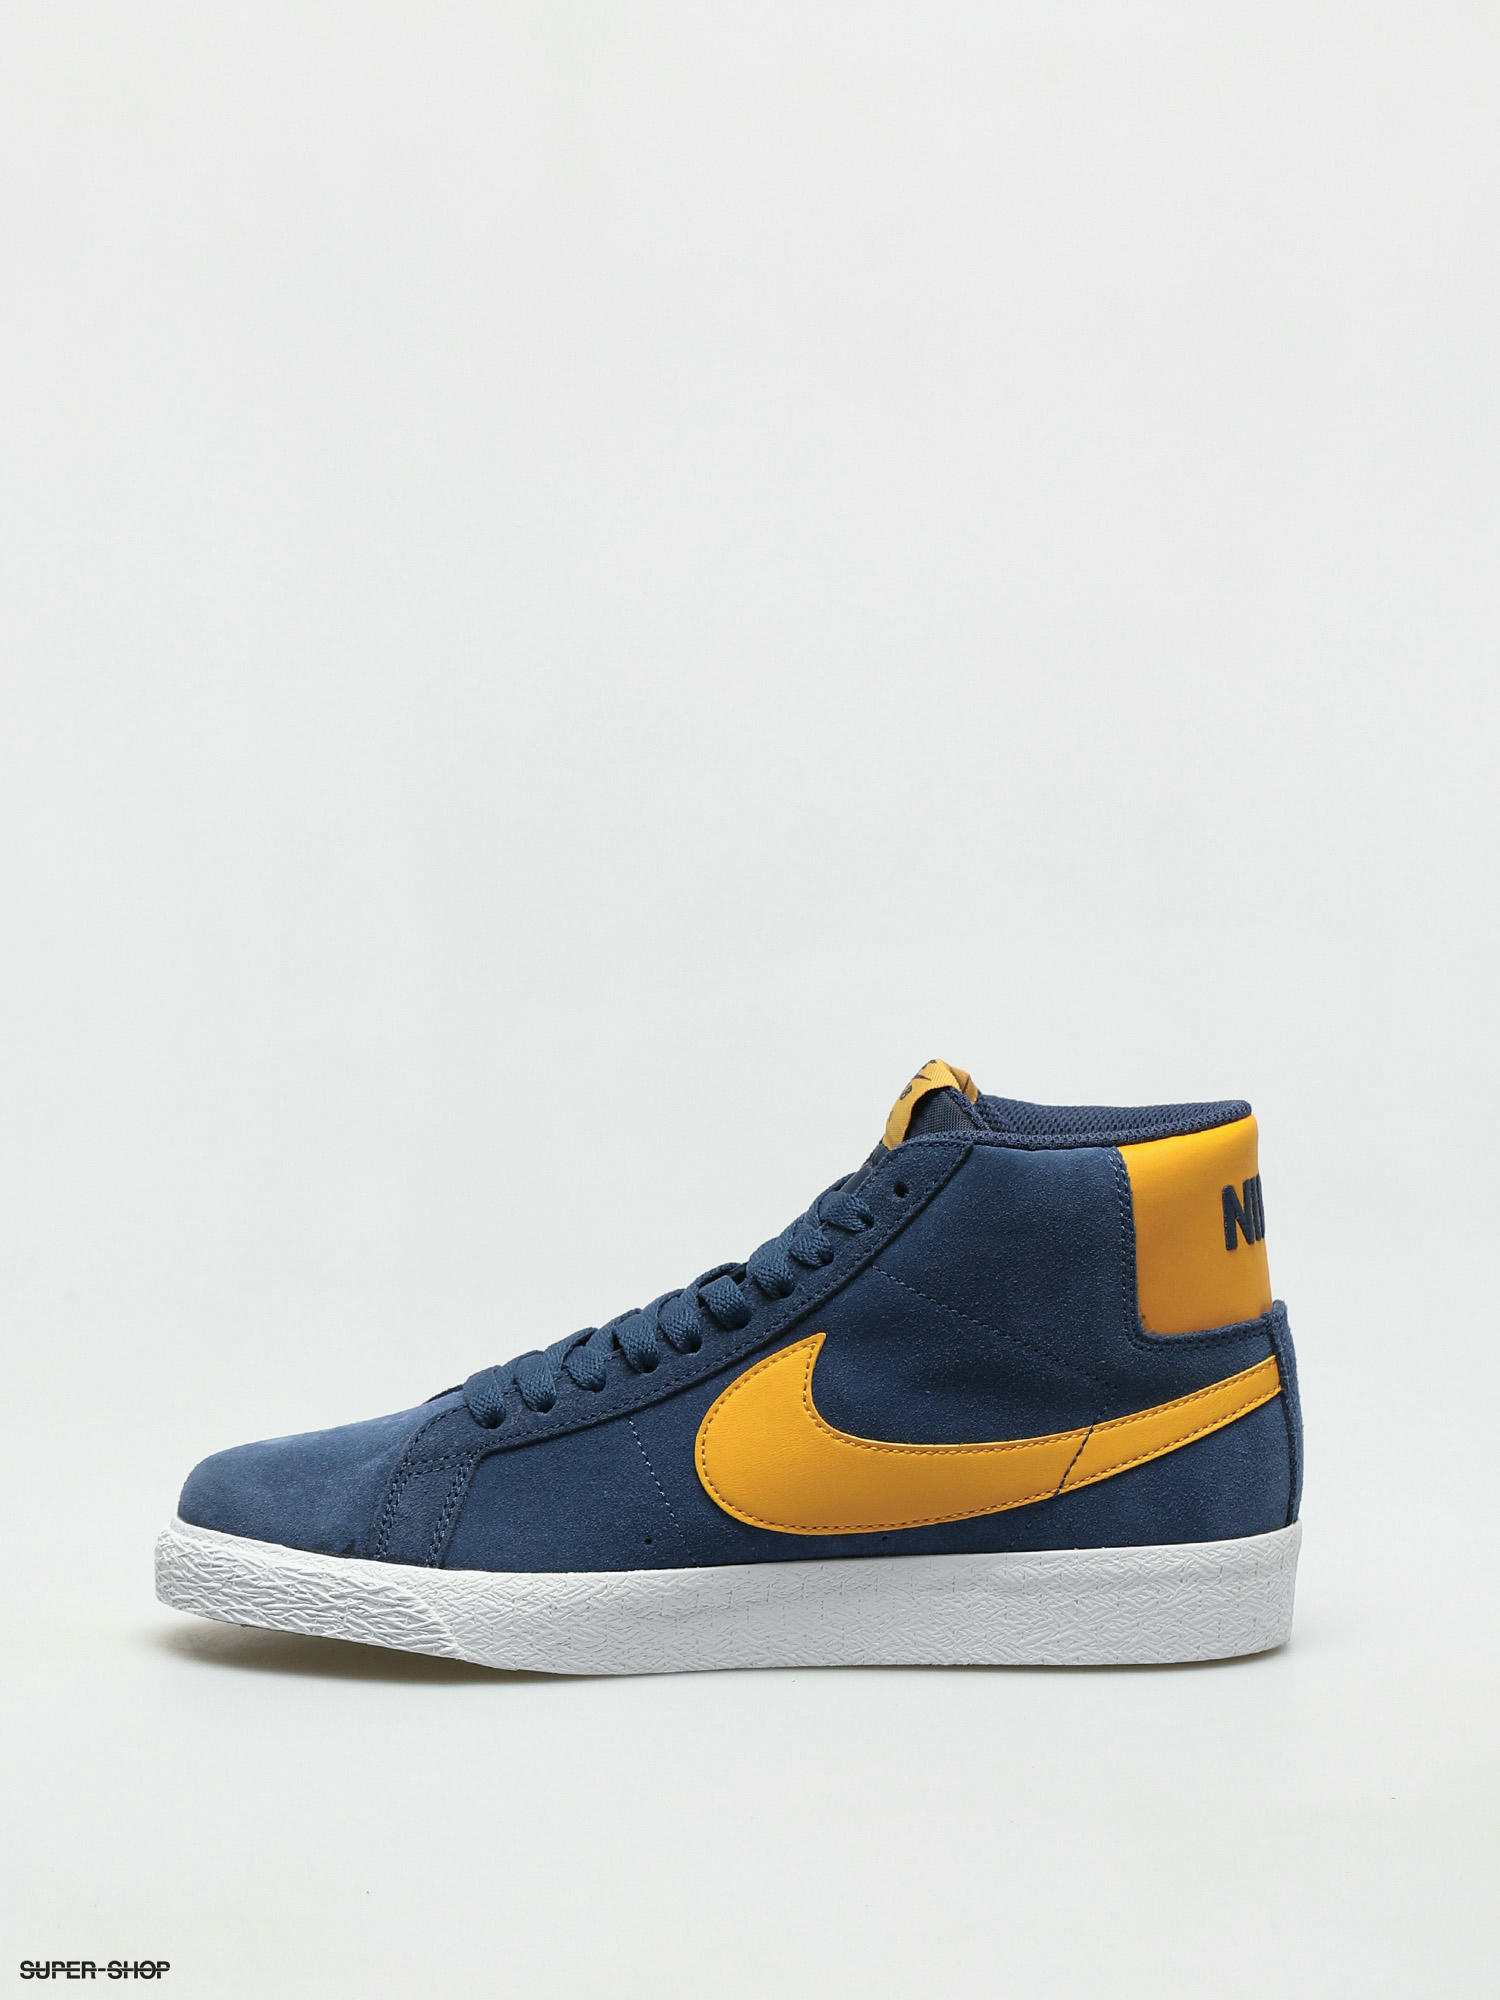 navy blue and gold nike shoes